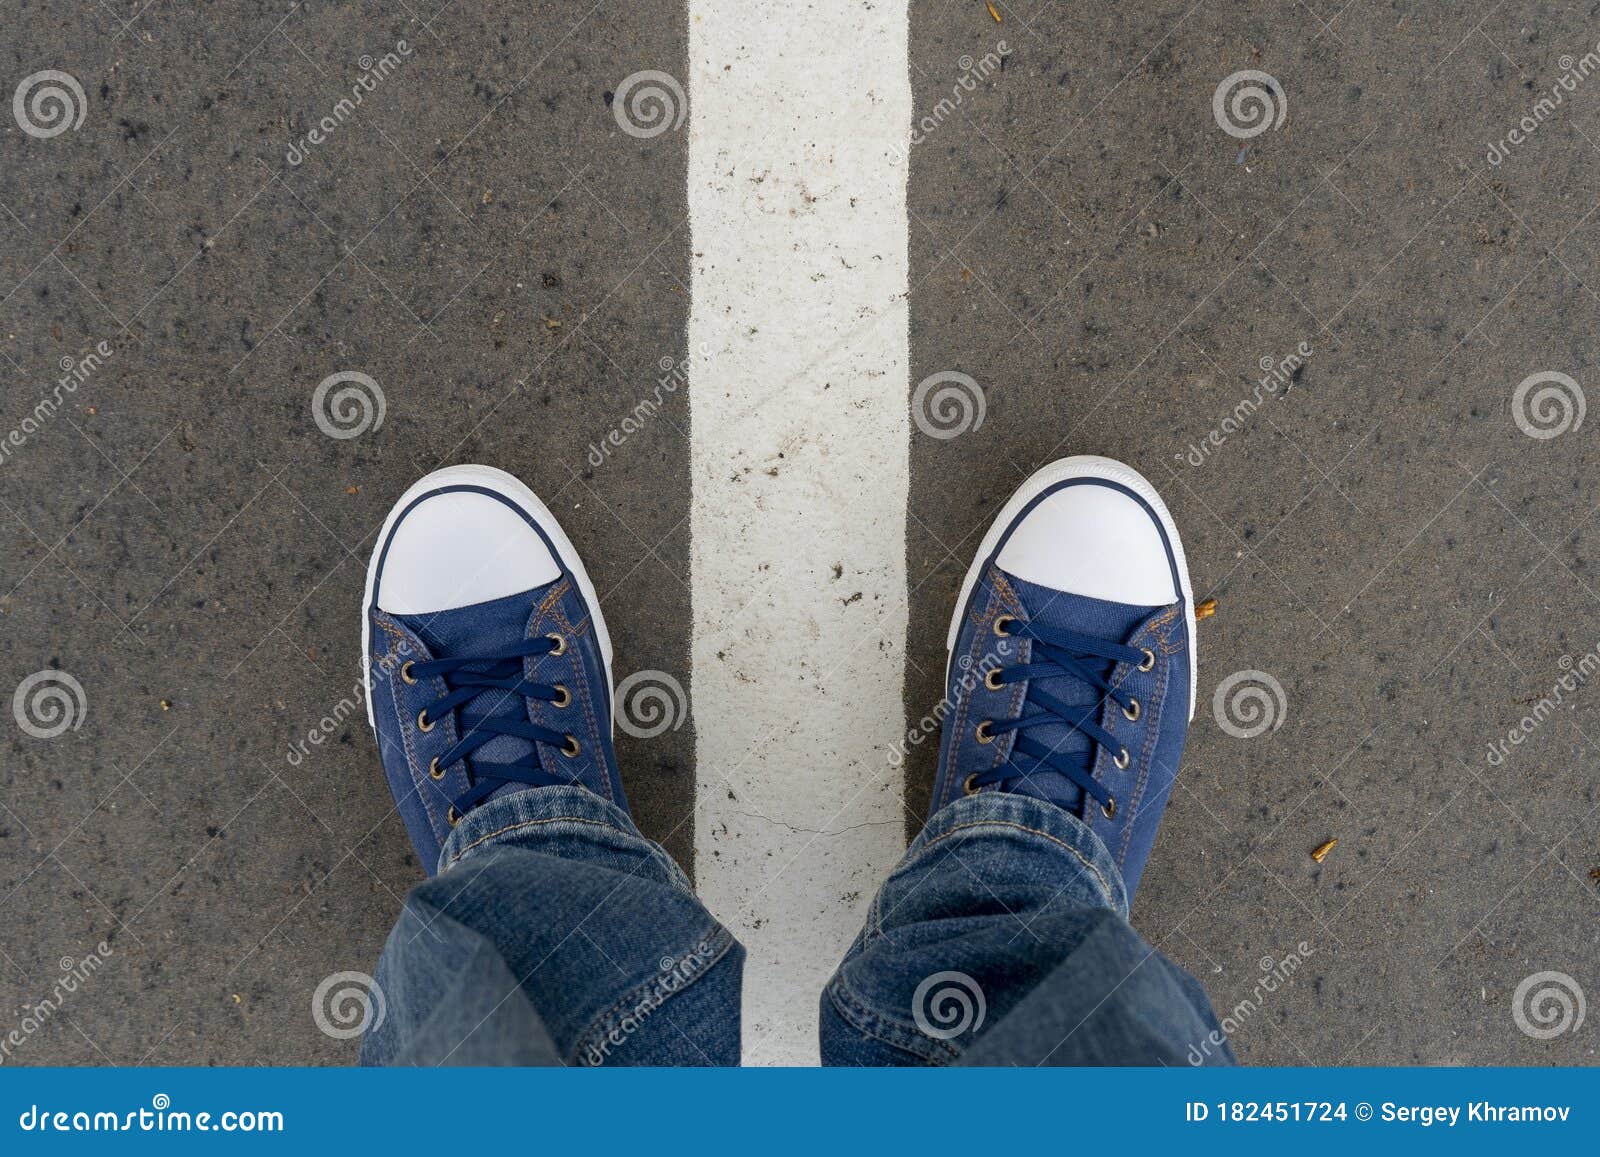 Male Feet in Blue Jeans and Blue Sneakers Shoes Stand on Street Asphalt ...